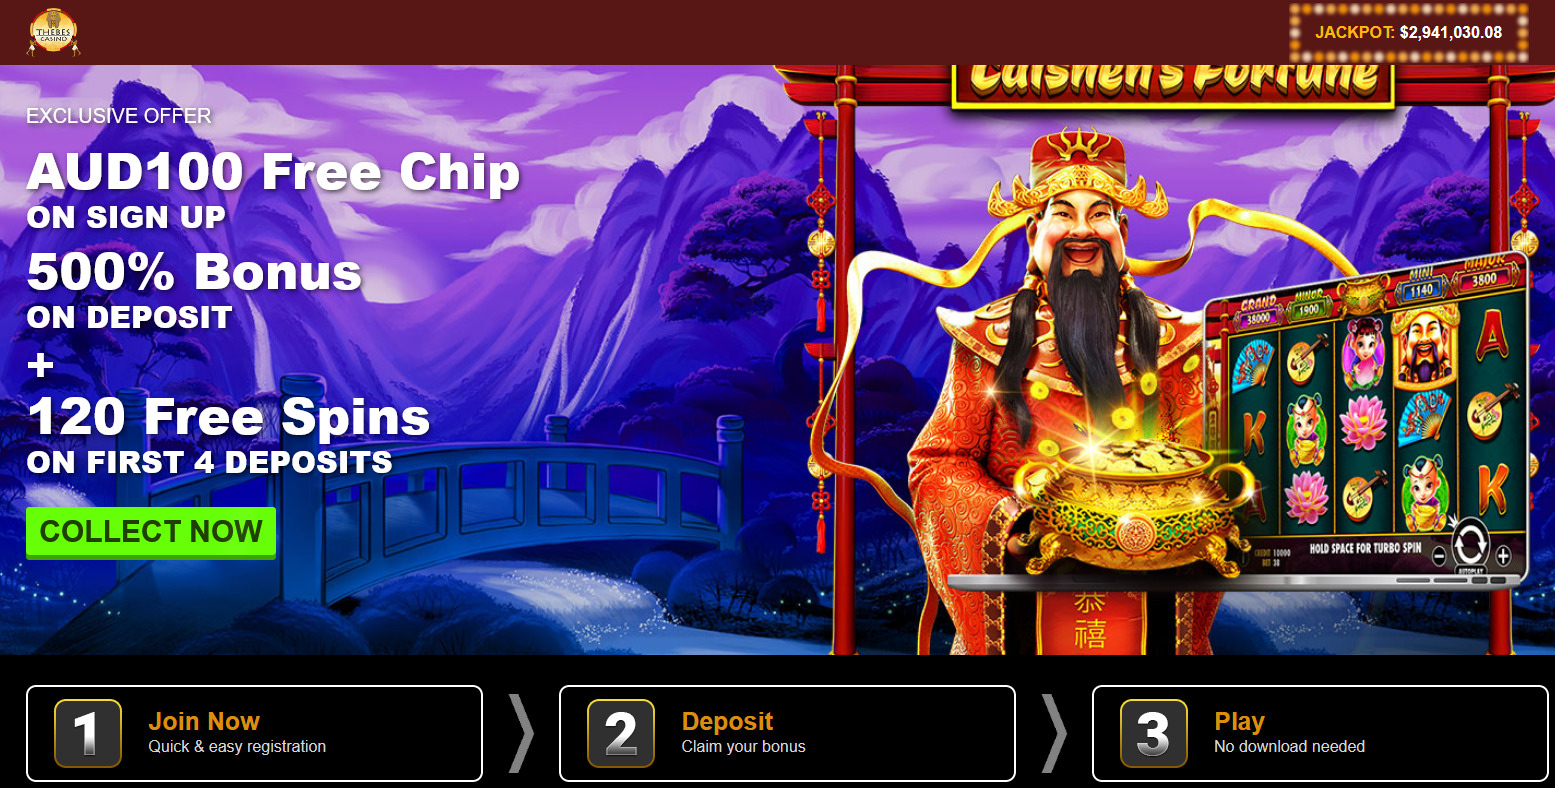 50 FS on SU + 480 Free Spins on First 4 Deposits + 50